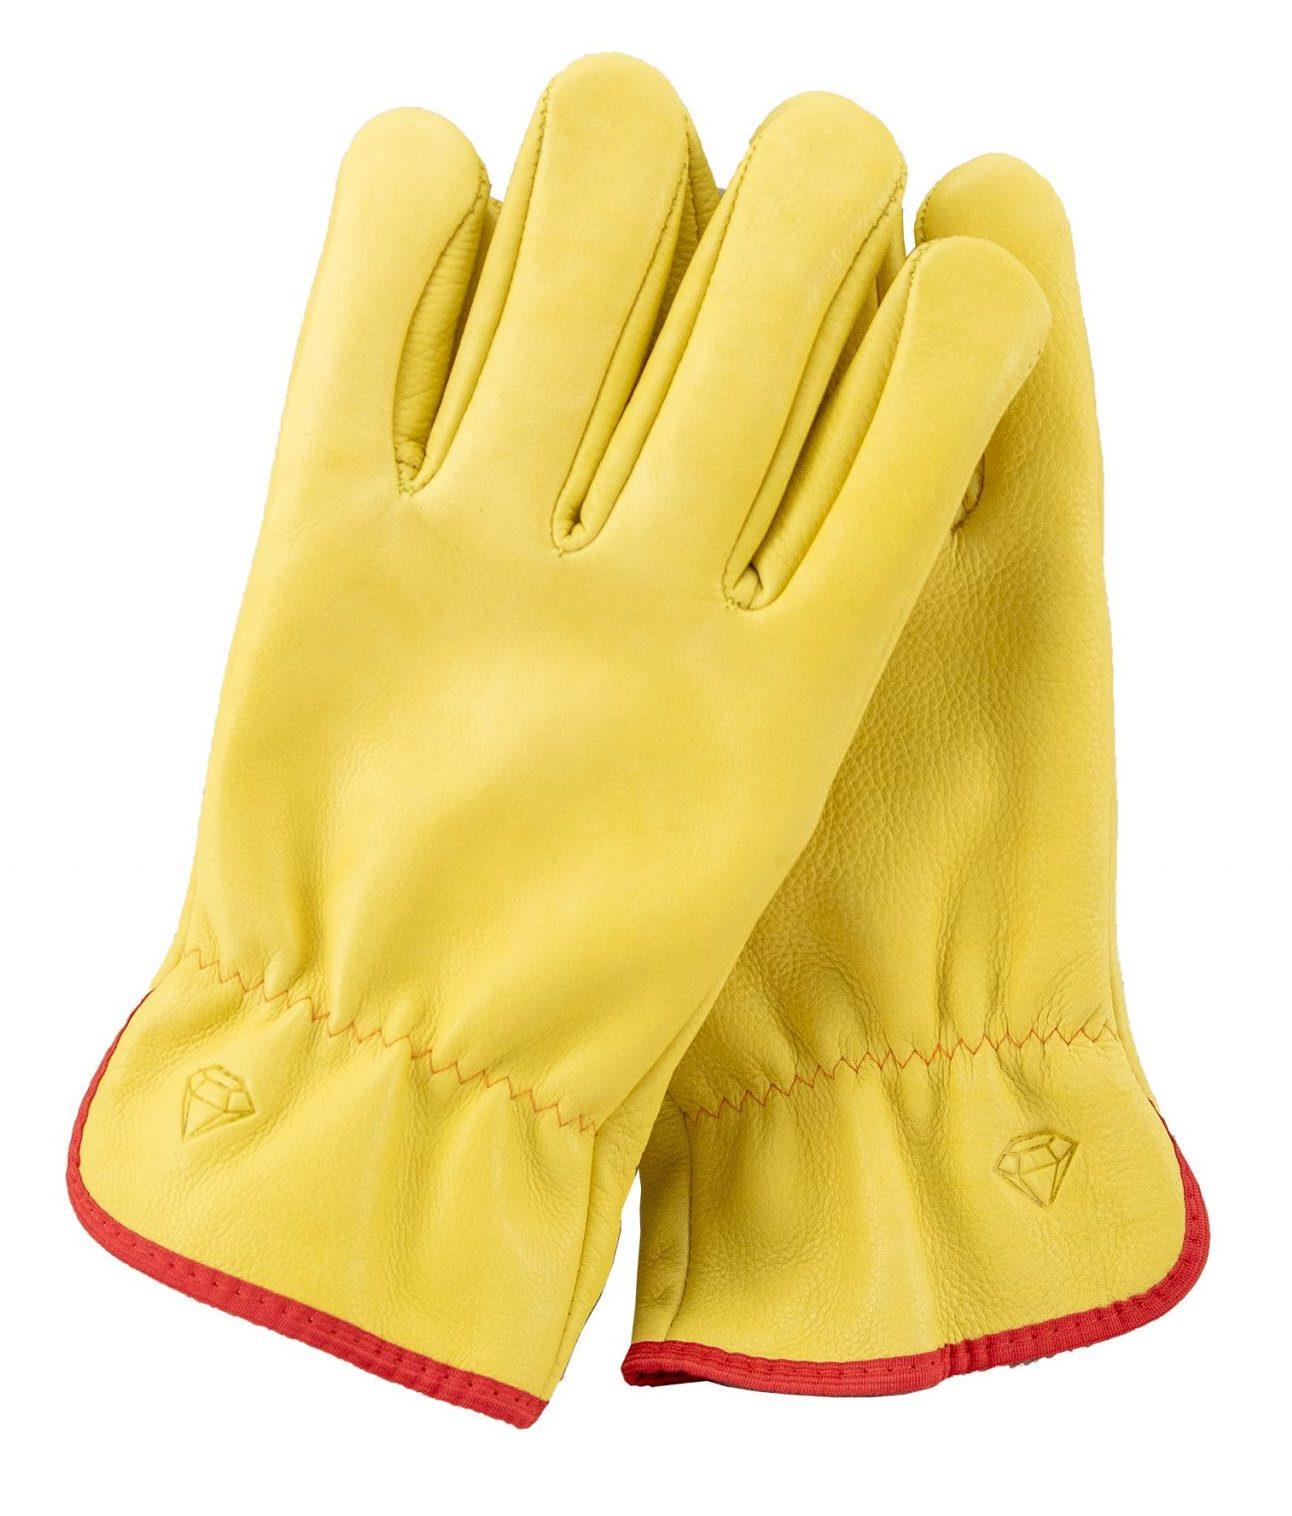 Unbreakable yellow cowhide premium leather lined drivers work glove #U510